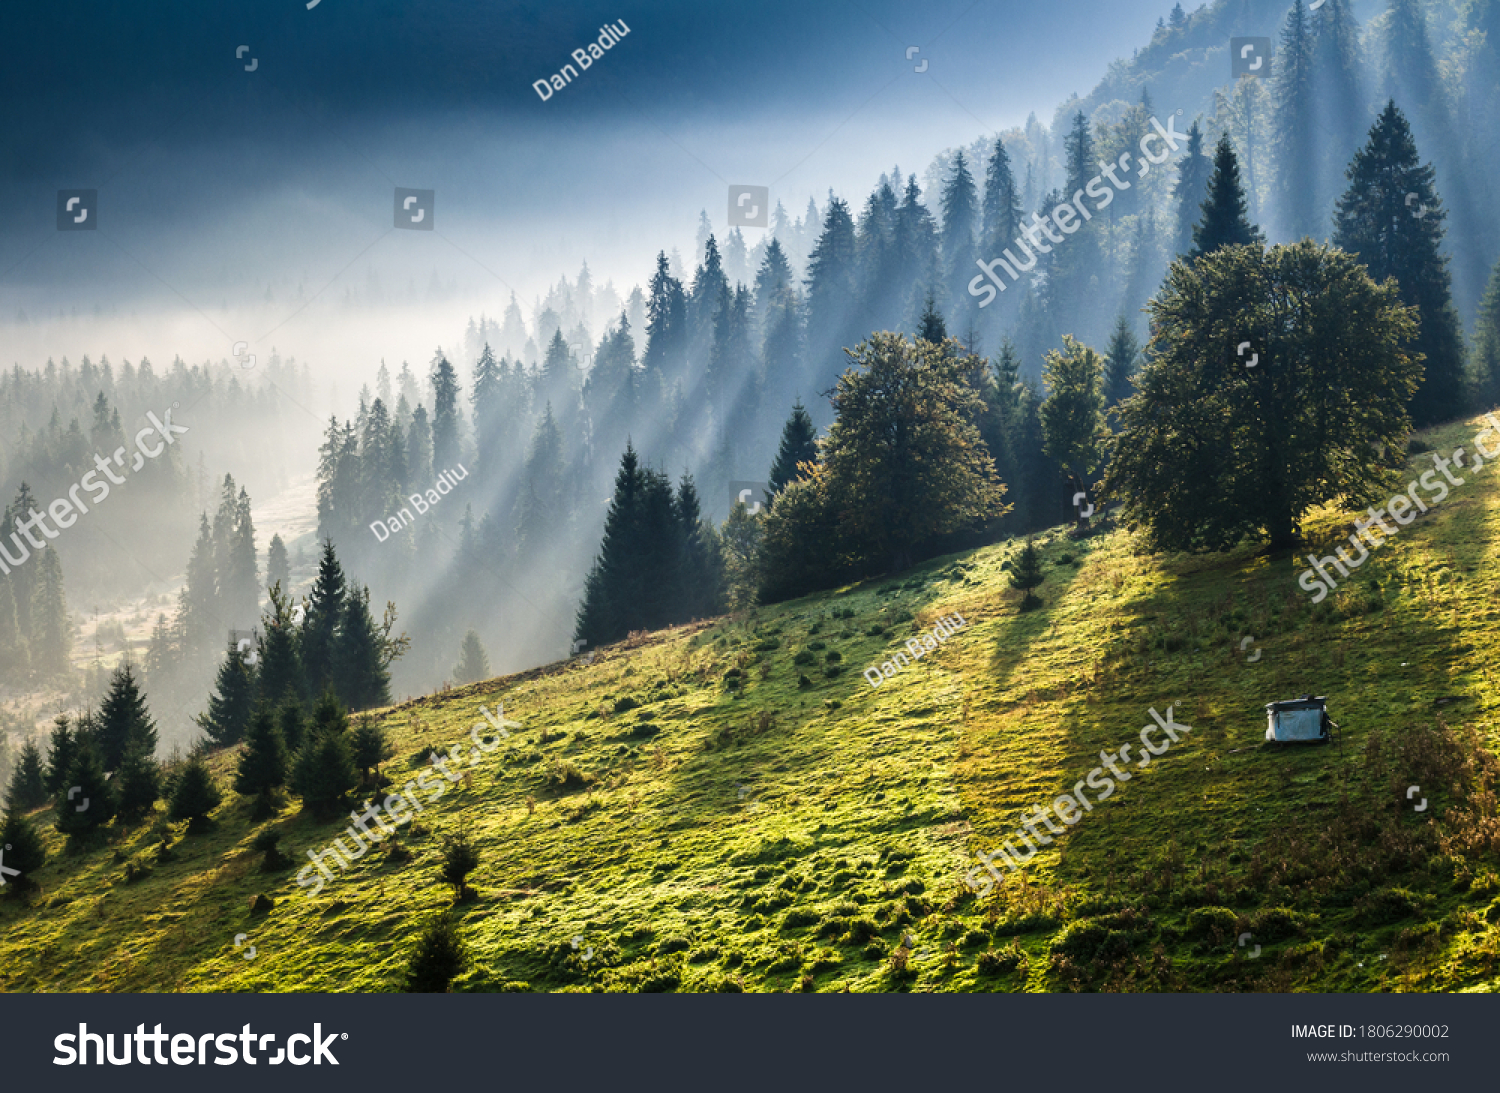 Peaceful morning in the mountain with forest and fog in background. Morning rays and fog above a village in mountains. #1806290002